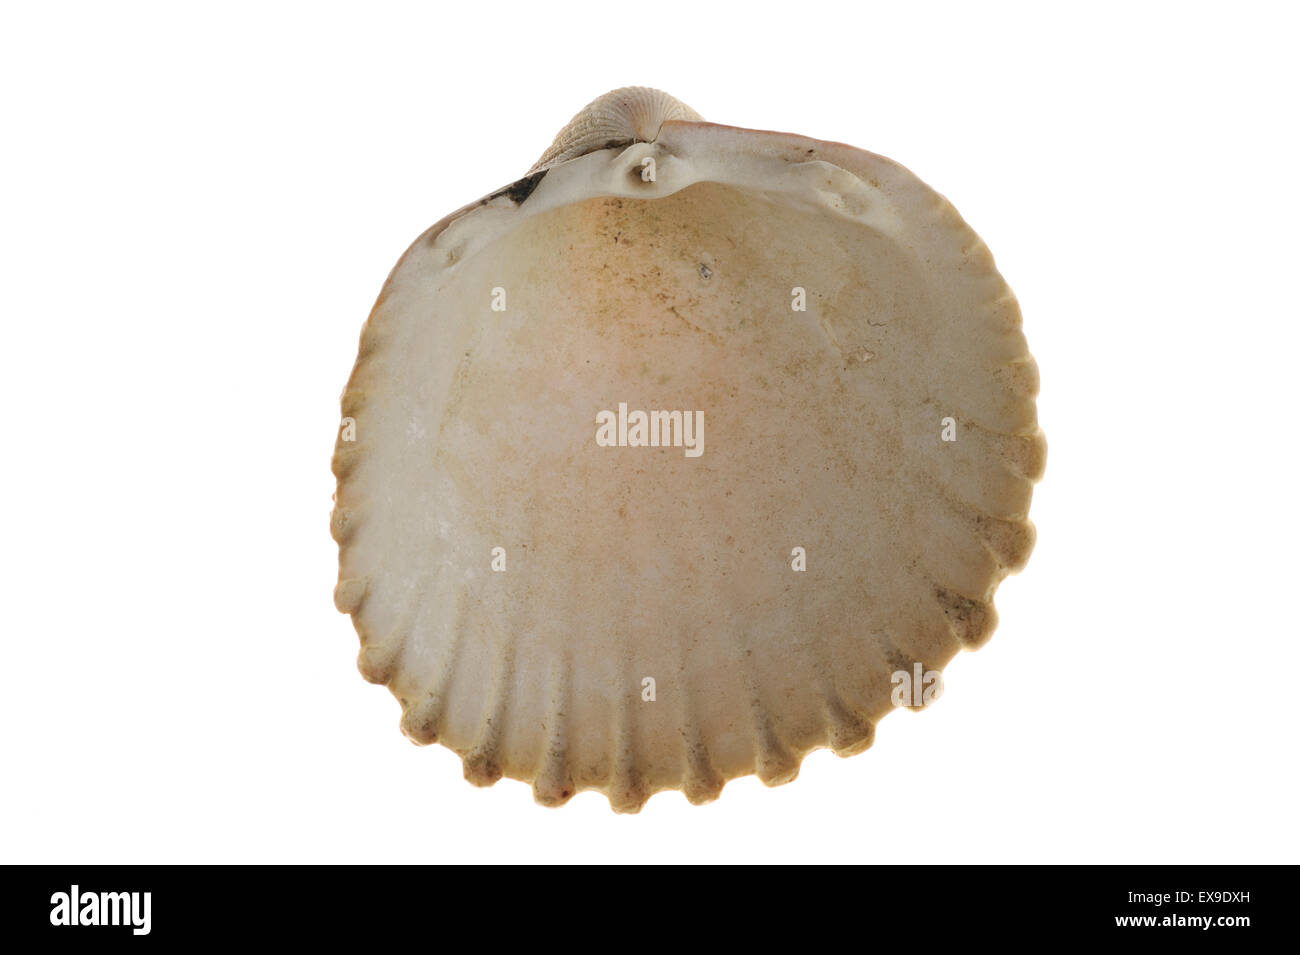 Prickly cockle (Acanthocardia echinata) shell on white background Stock Photo